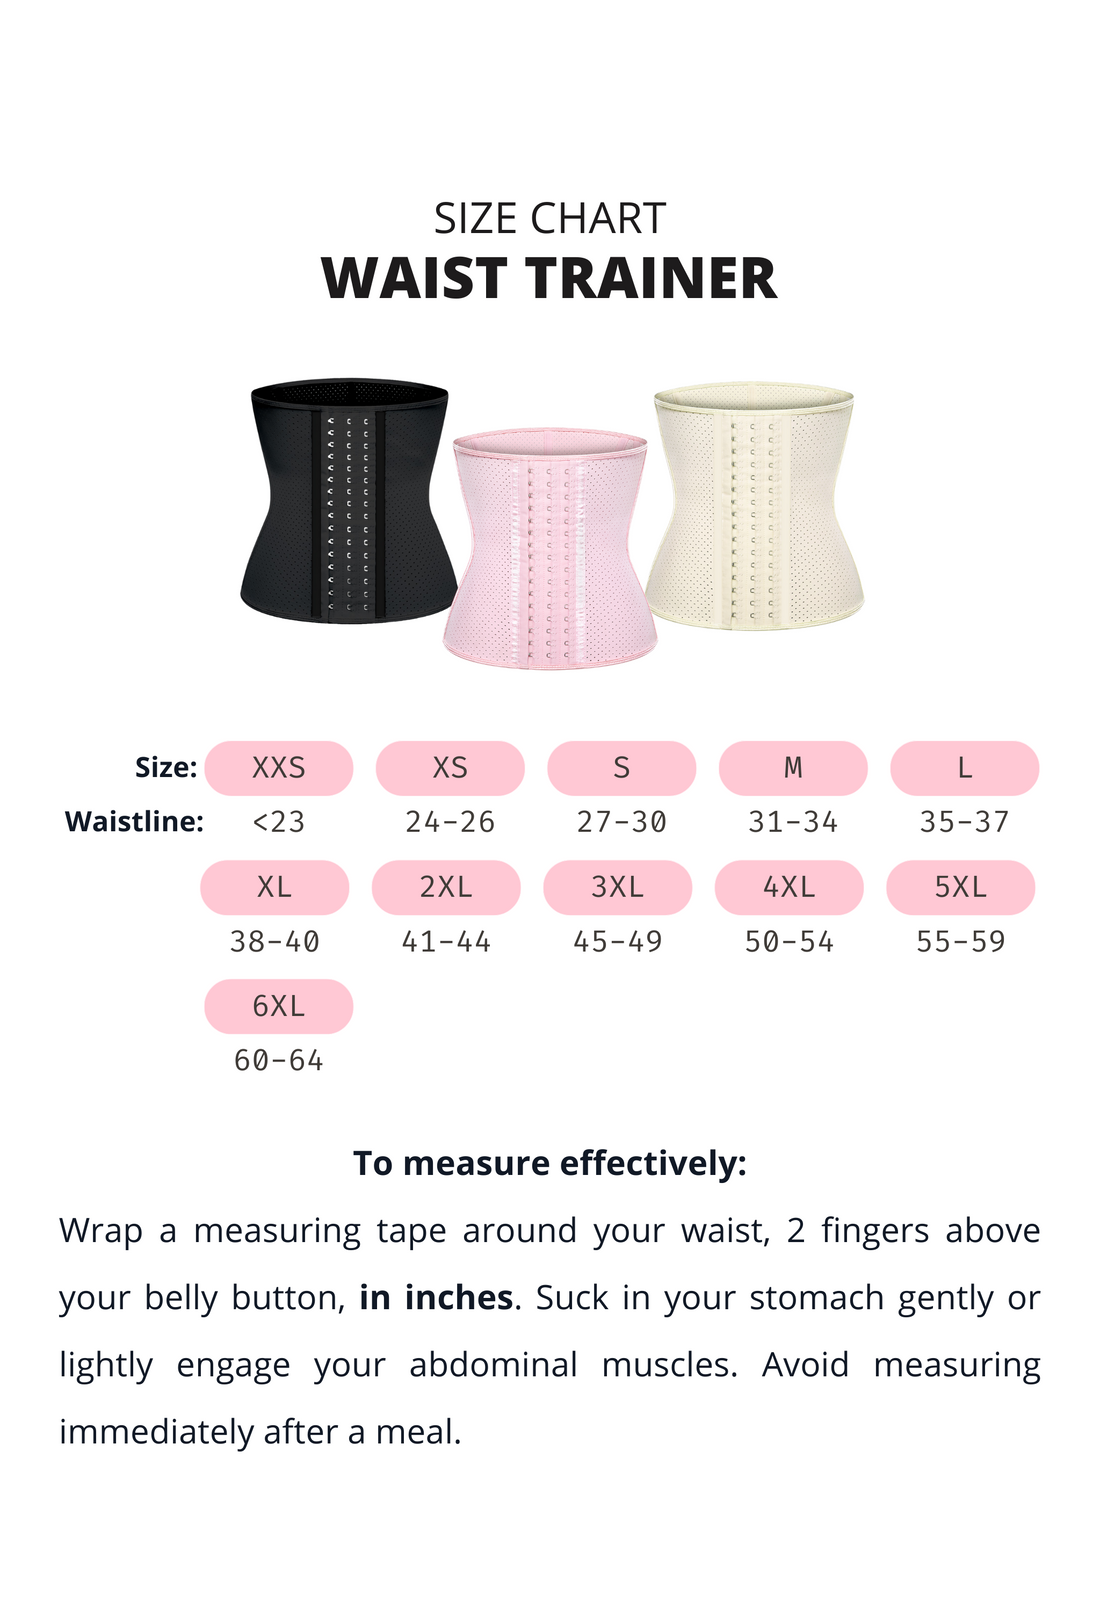 Latex waist trainers size charts XXS to 6XL, and how to measure effectively